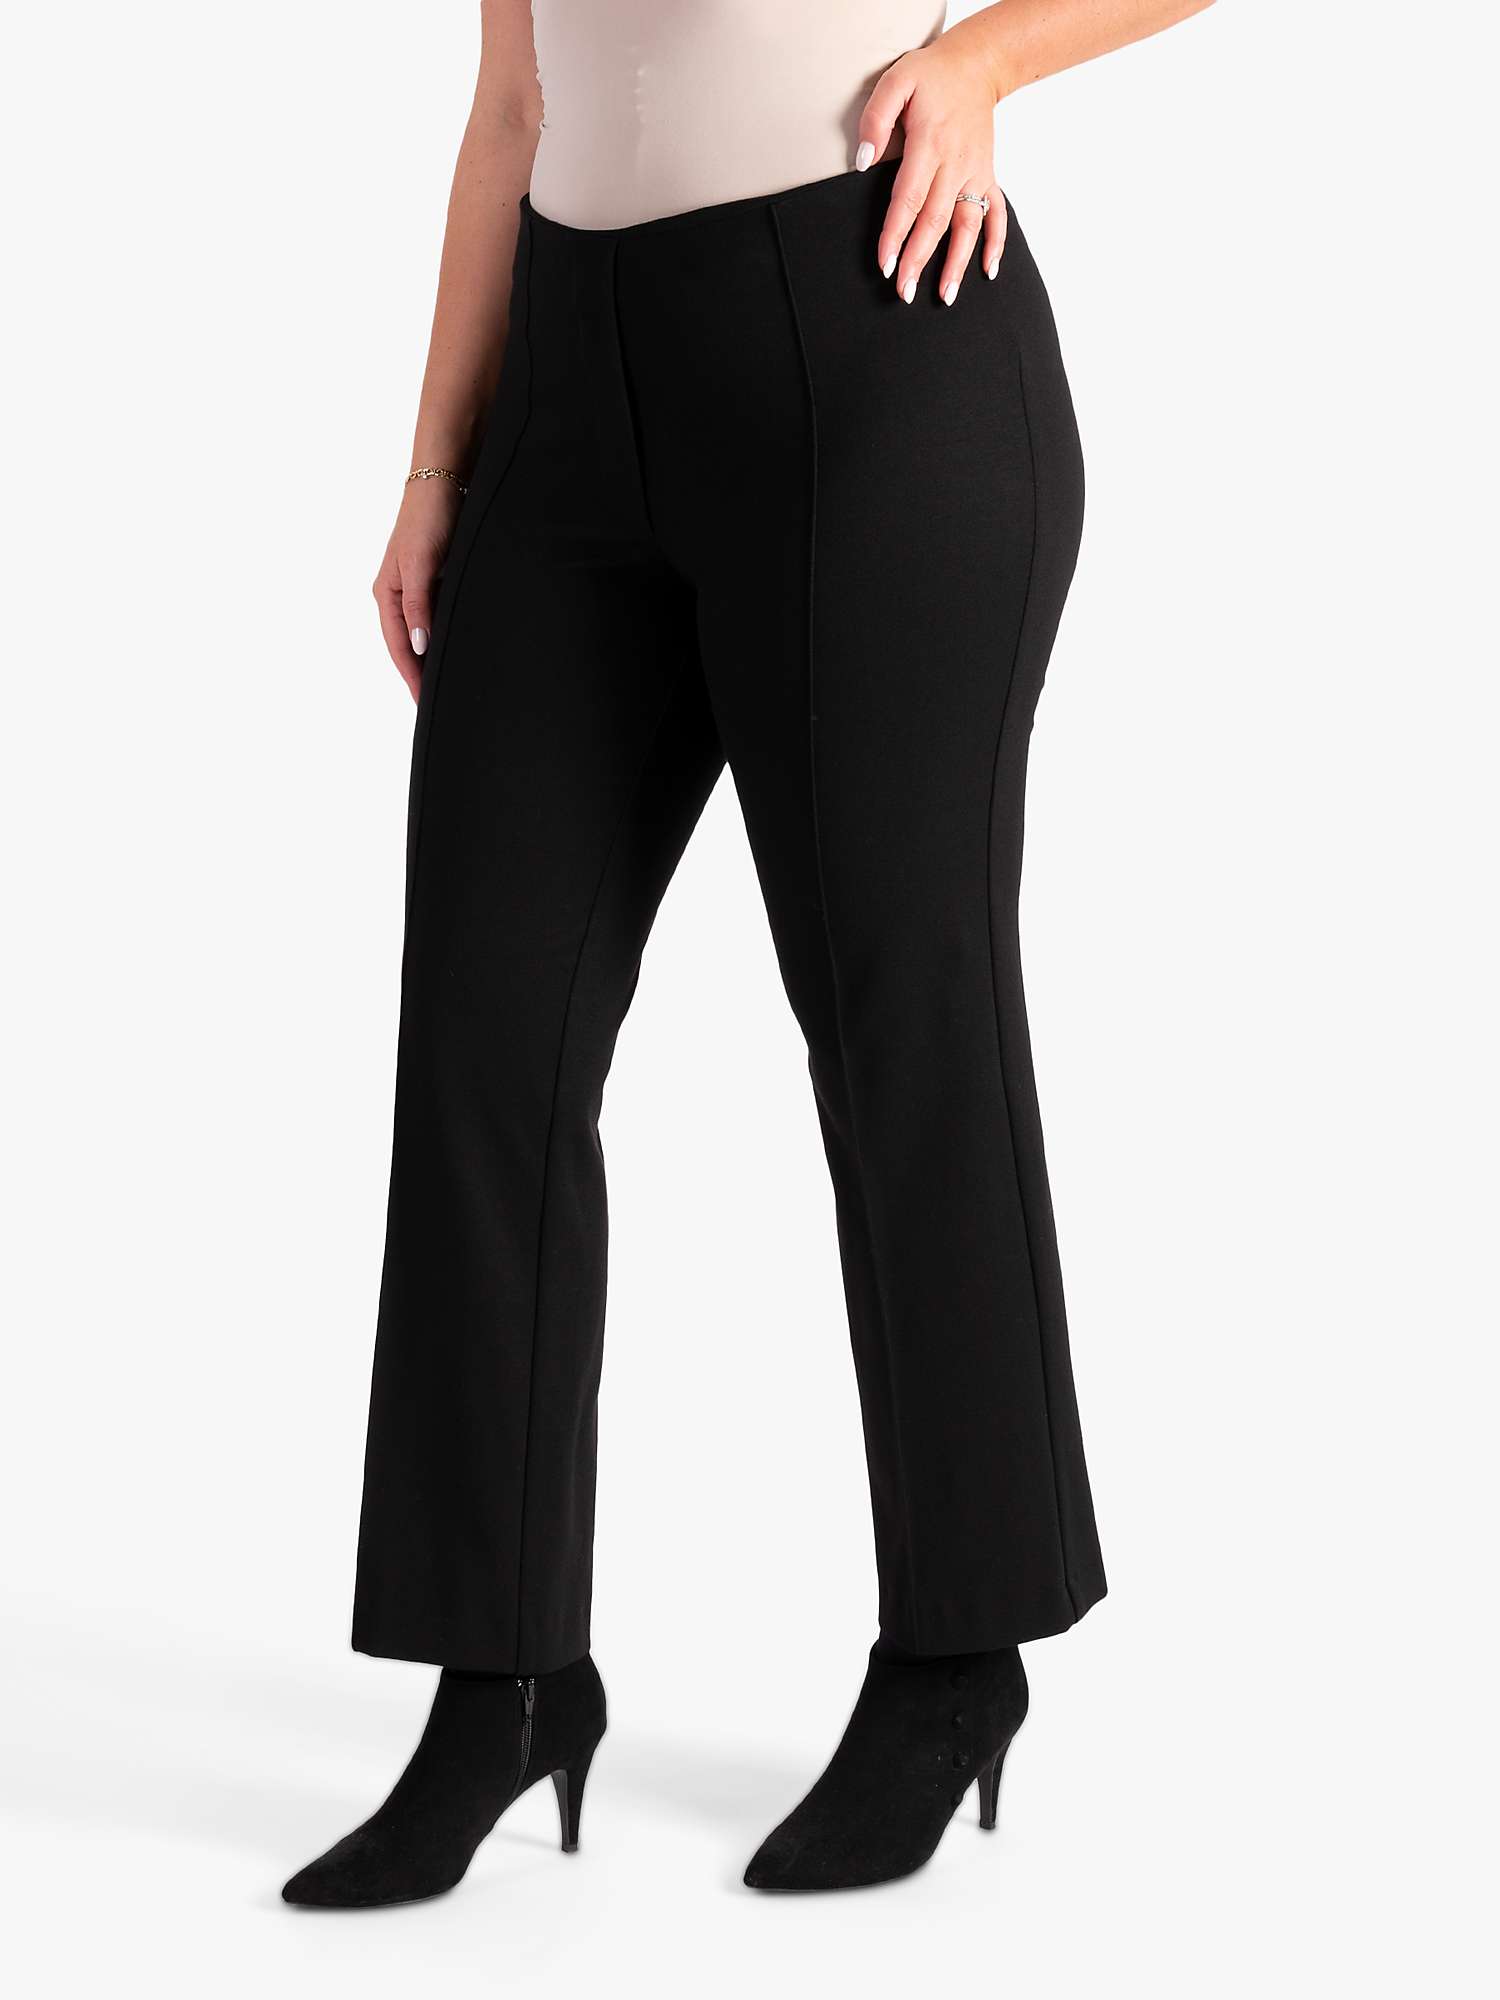 Buy chesca Ponte Roma Straight Leg Trousers, Black Online at johnlewis.com